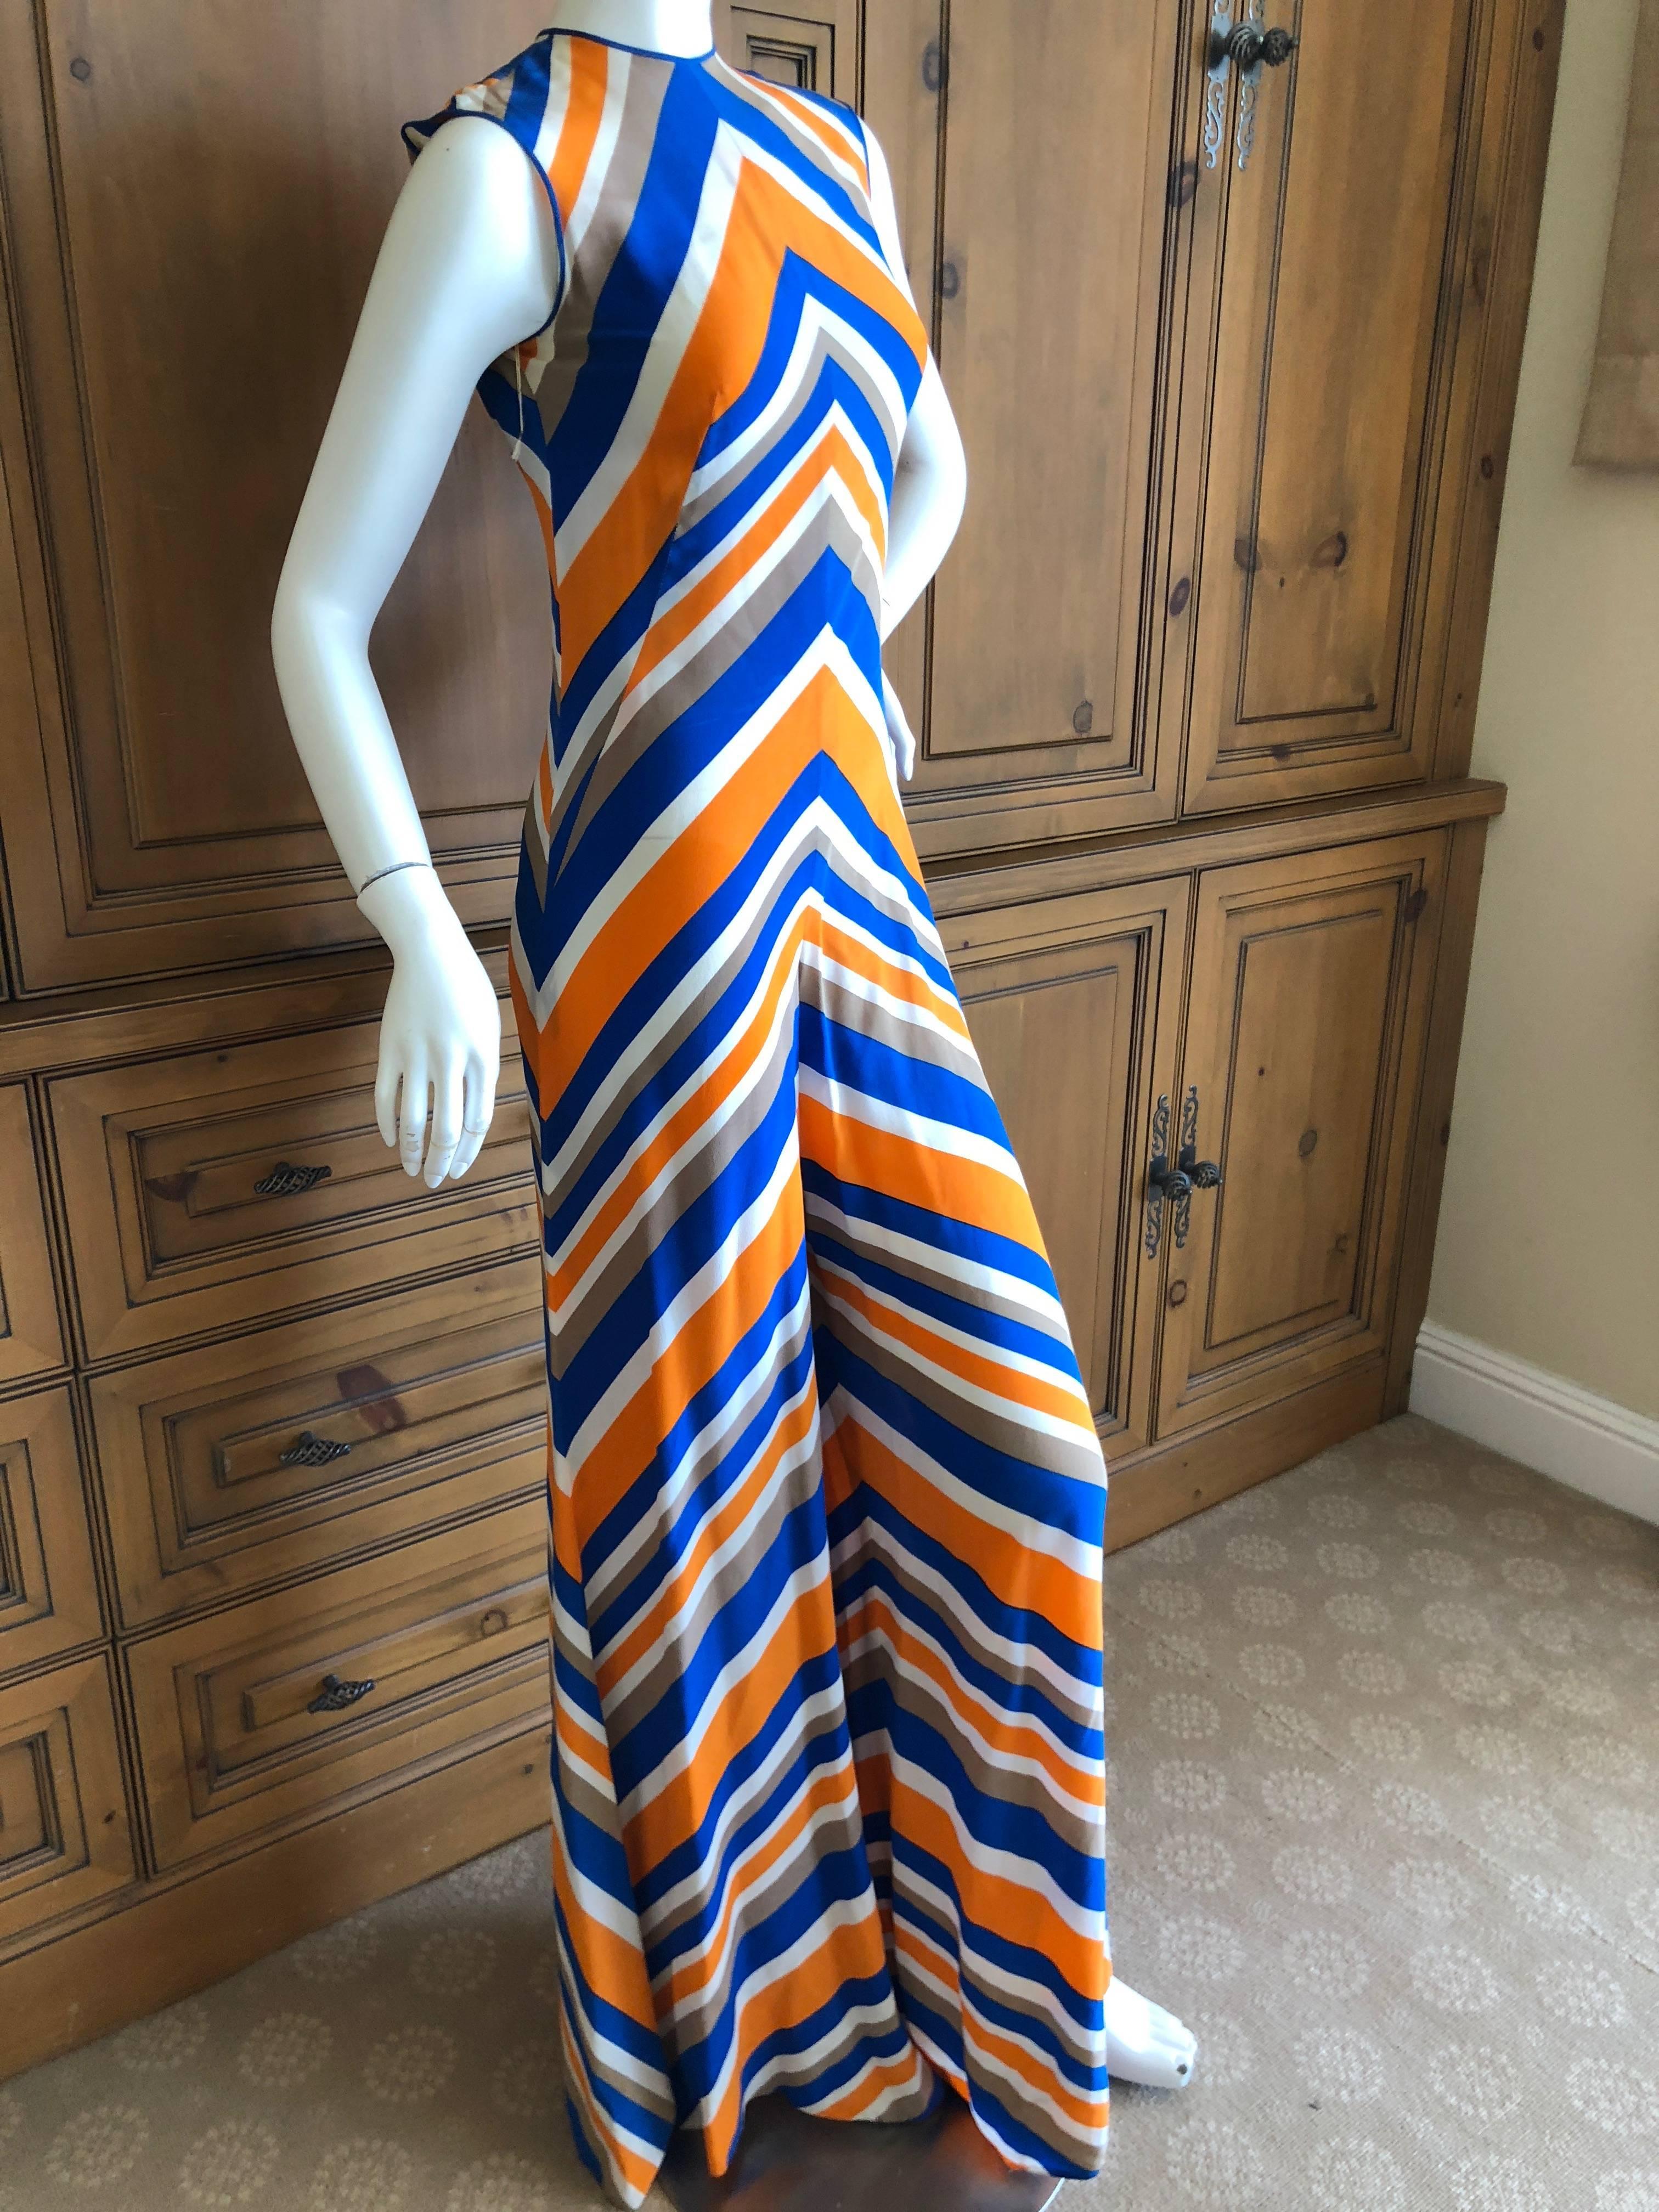 Cardinali 1970 Playful Chevron Stripe Jumpsuit and Matching Floor Length Cape.
Runway sample
From the Archive of Marilyn Lewis, the creator of Cardinali
Cardinali was founded in Los Angeles in 1970, by Marilyn Lewis, who had already found success as